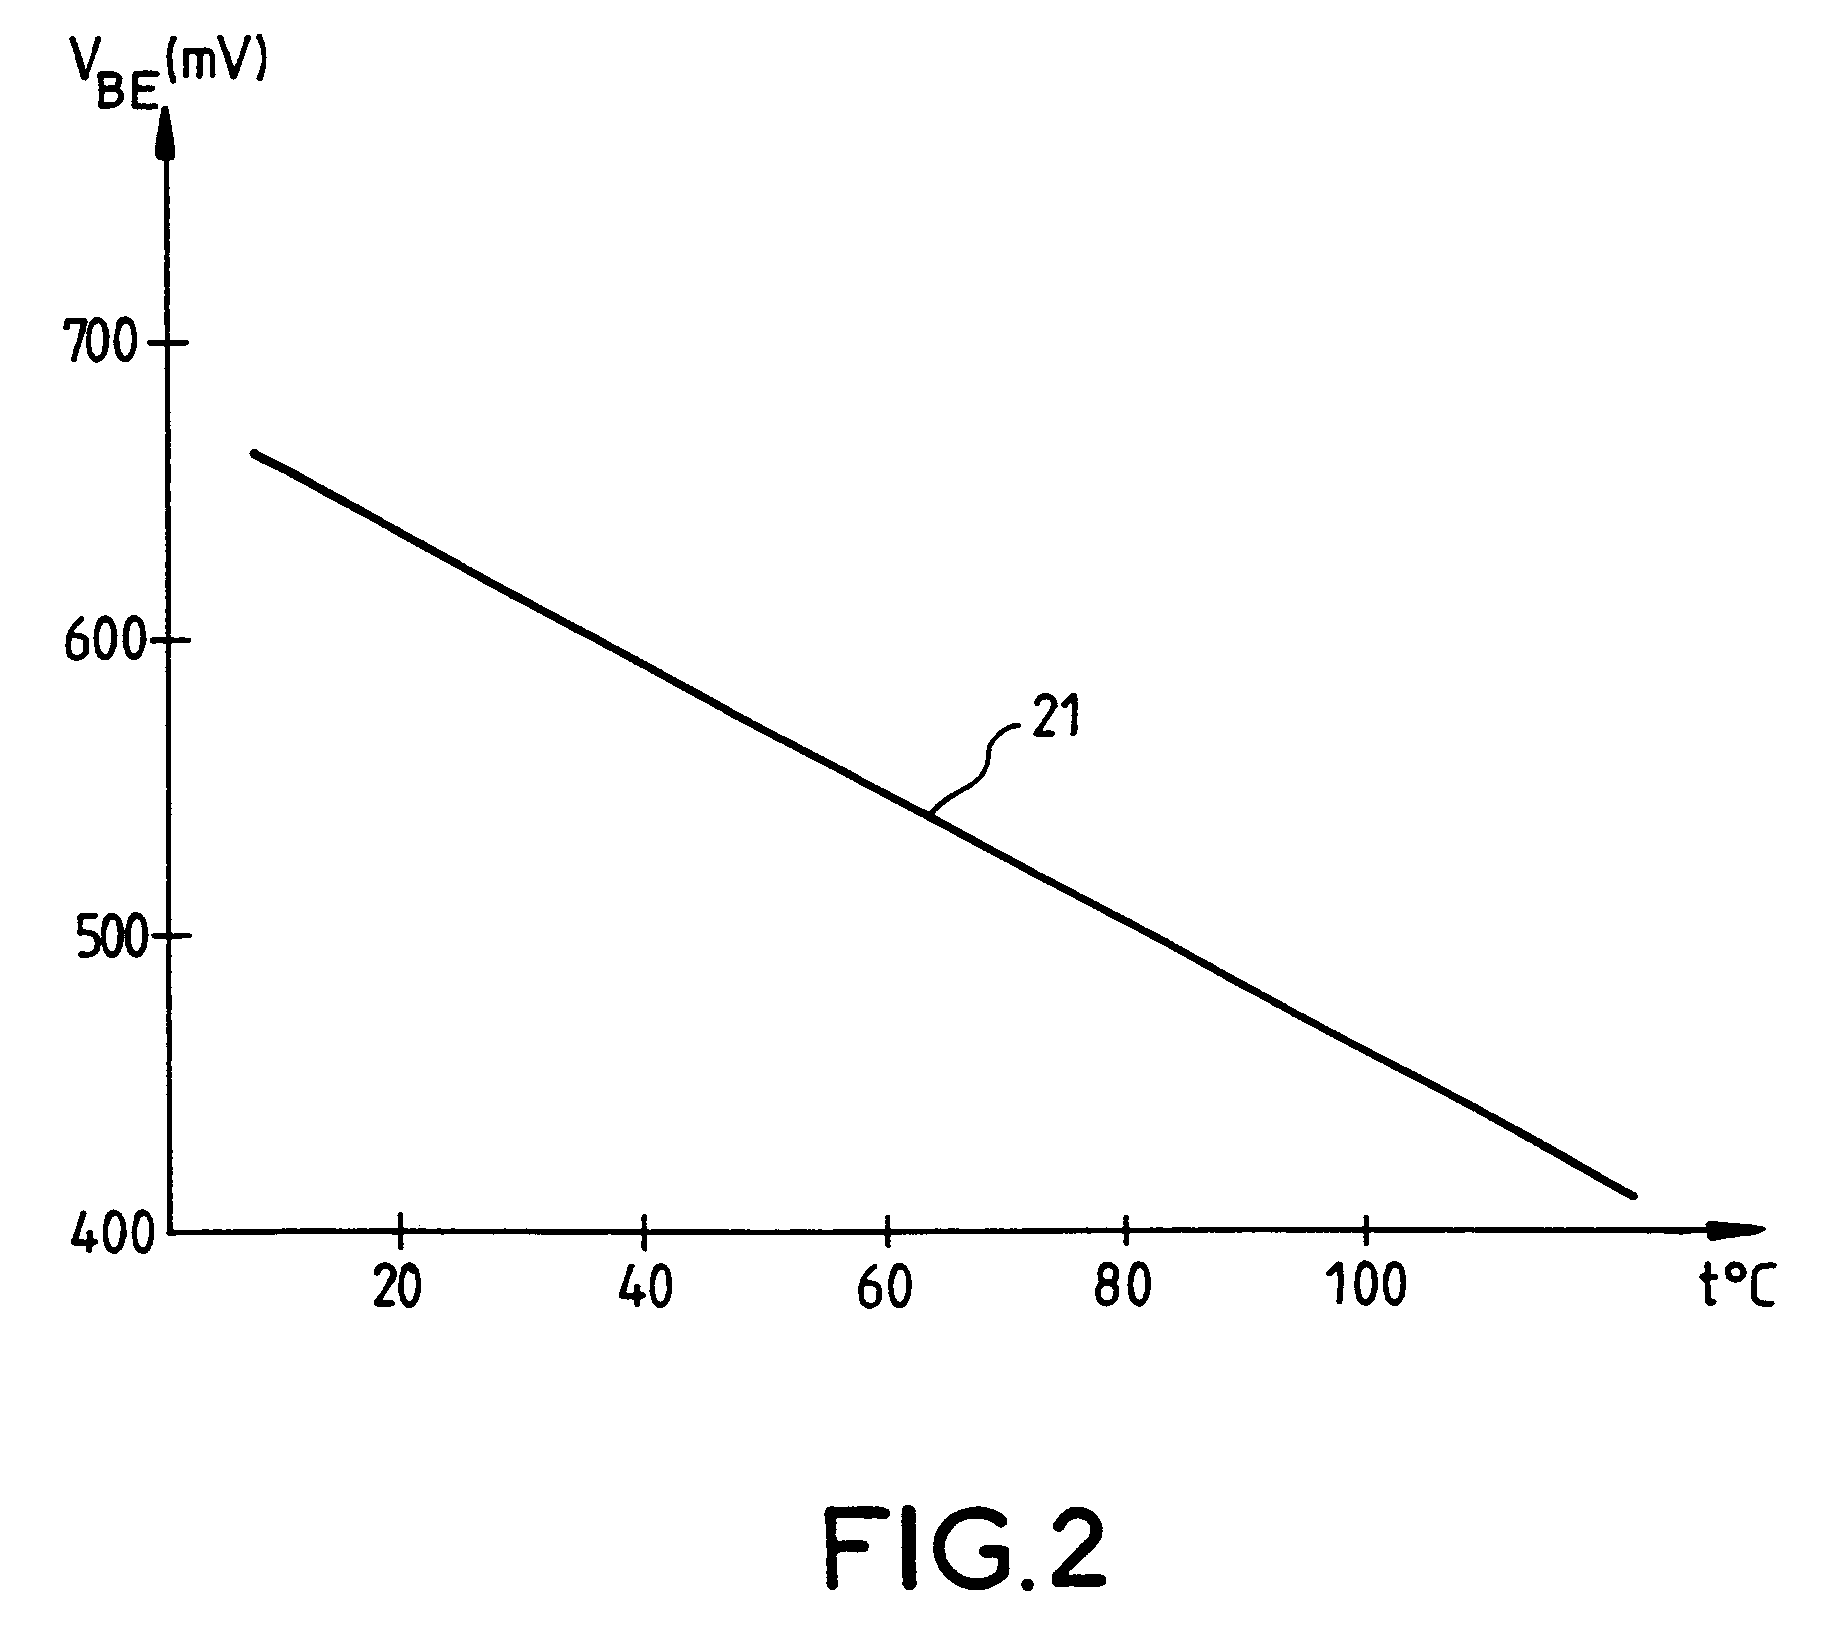 Method and device to measure the temperature of microwave components